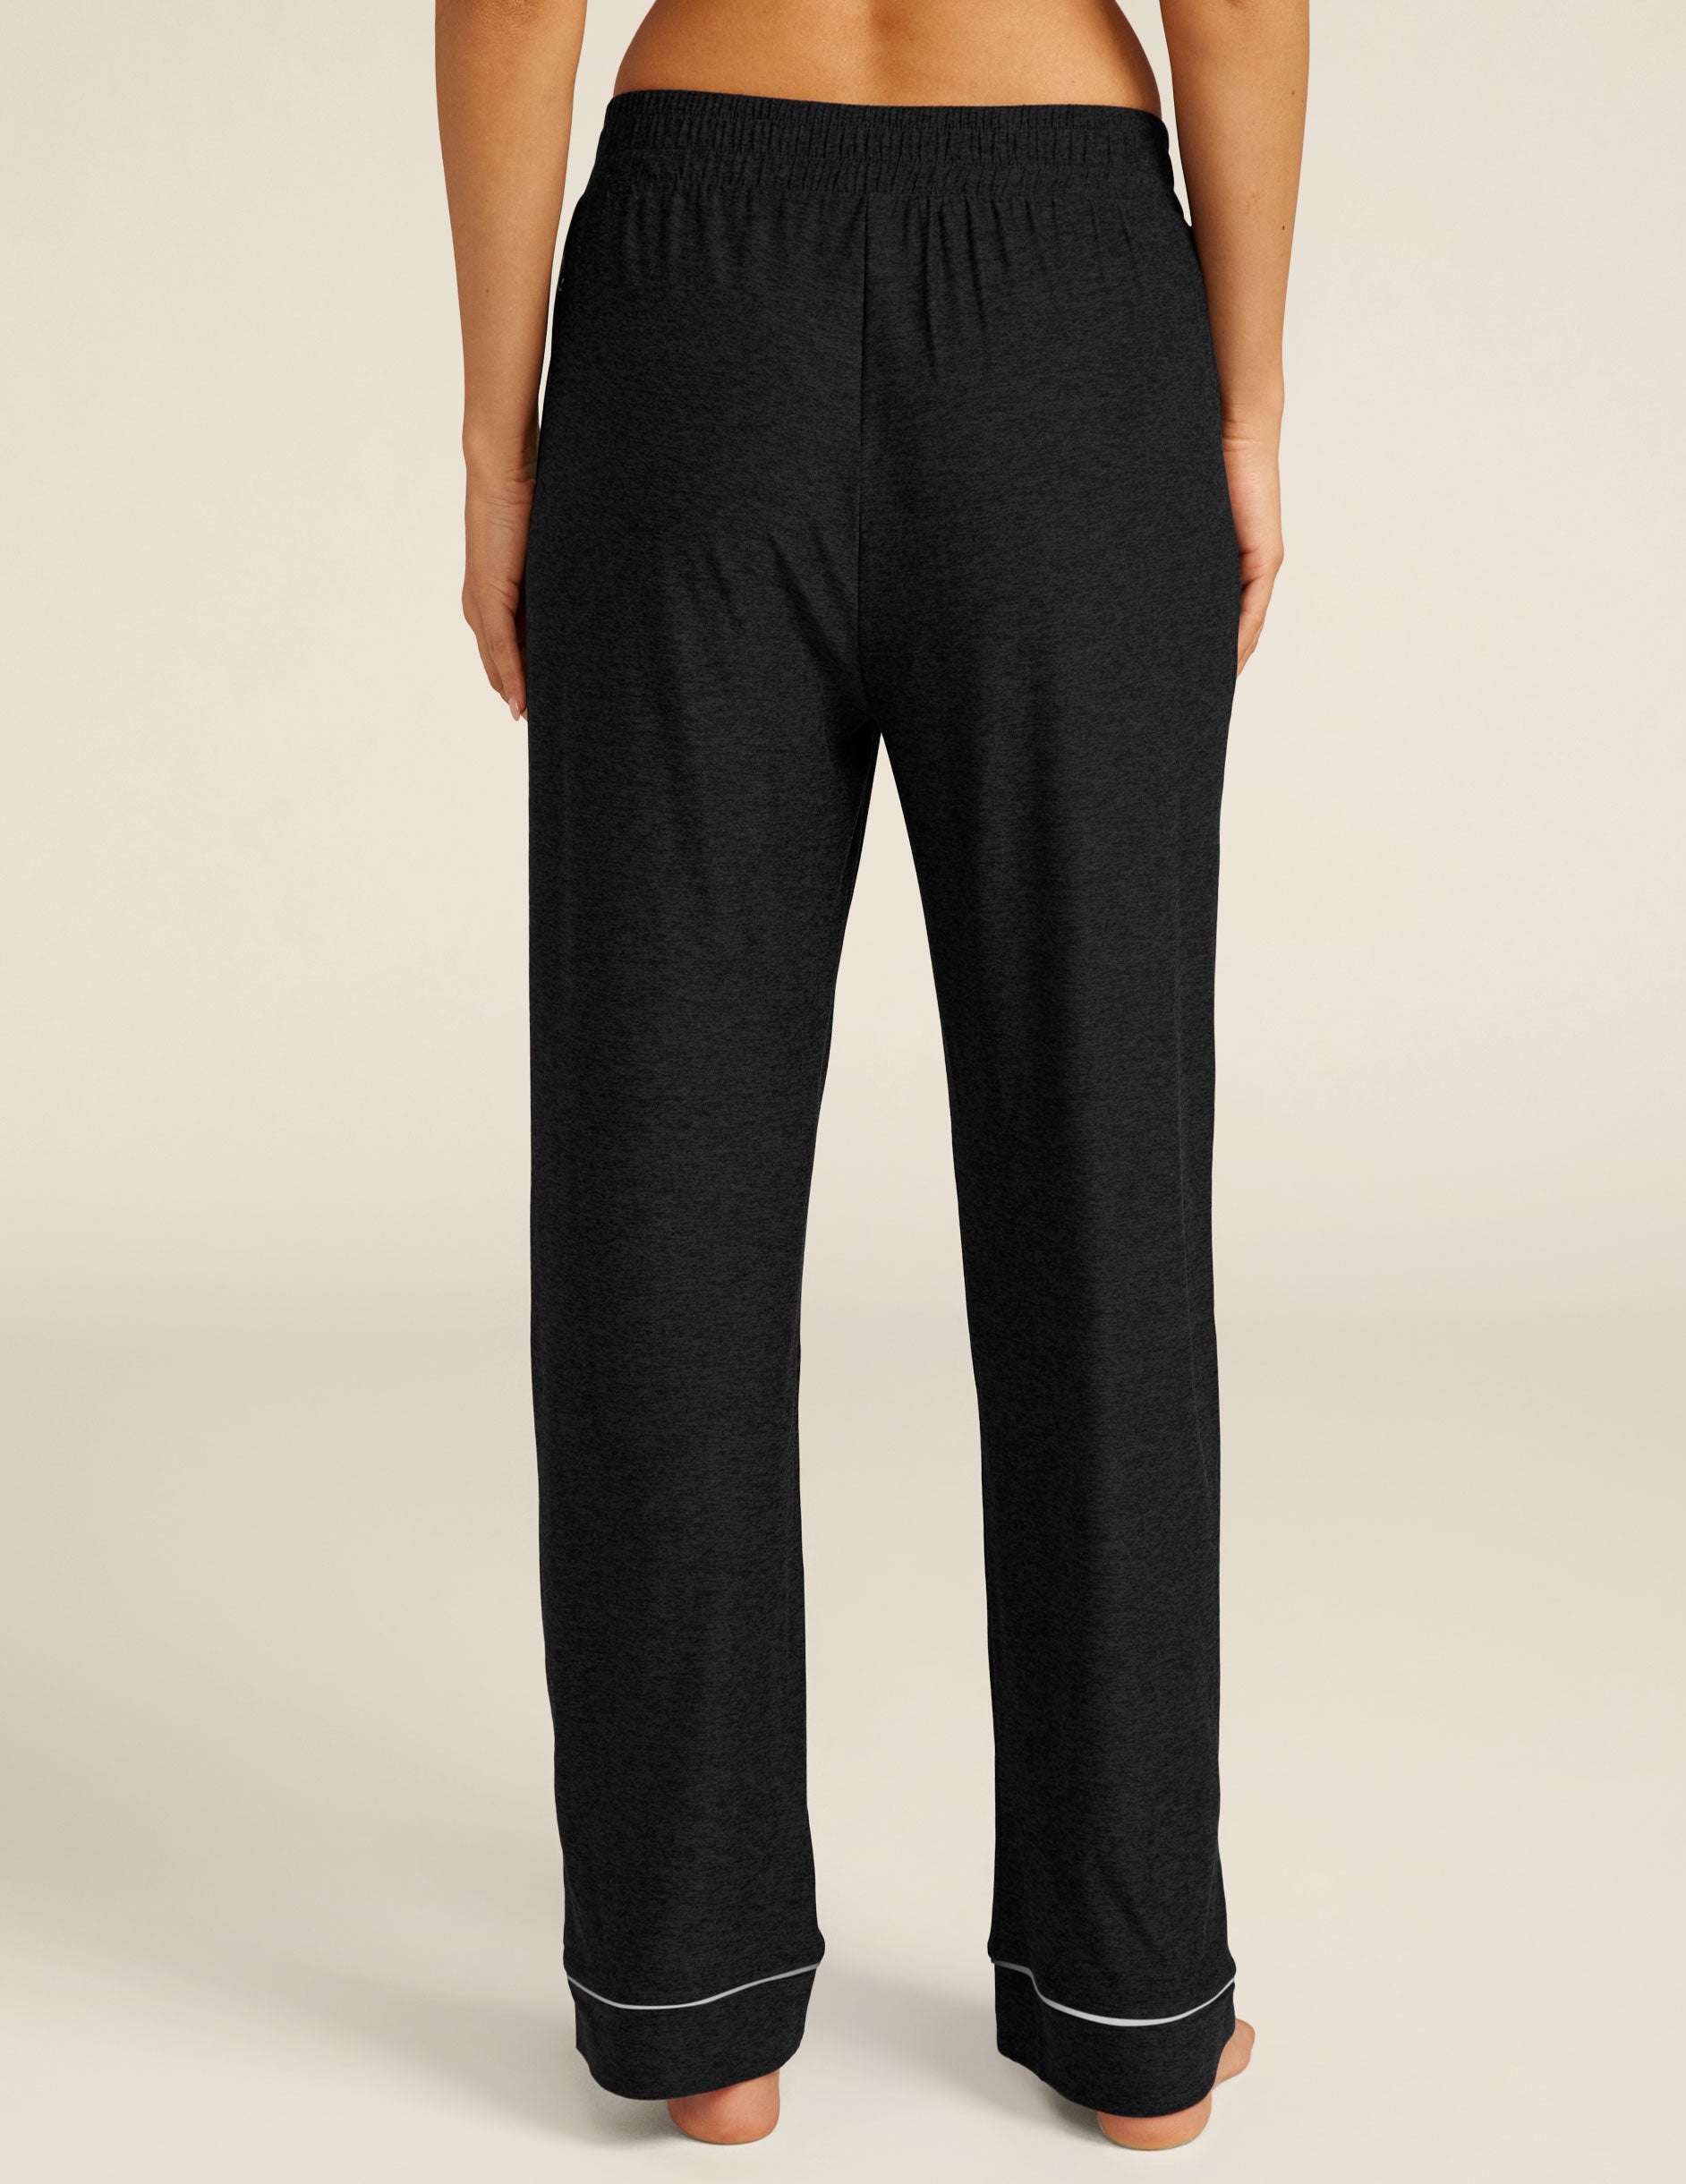 black sleep pants with white piping at ankles. 